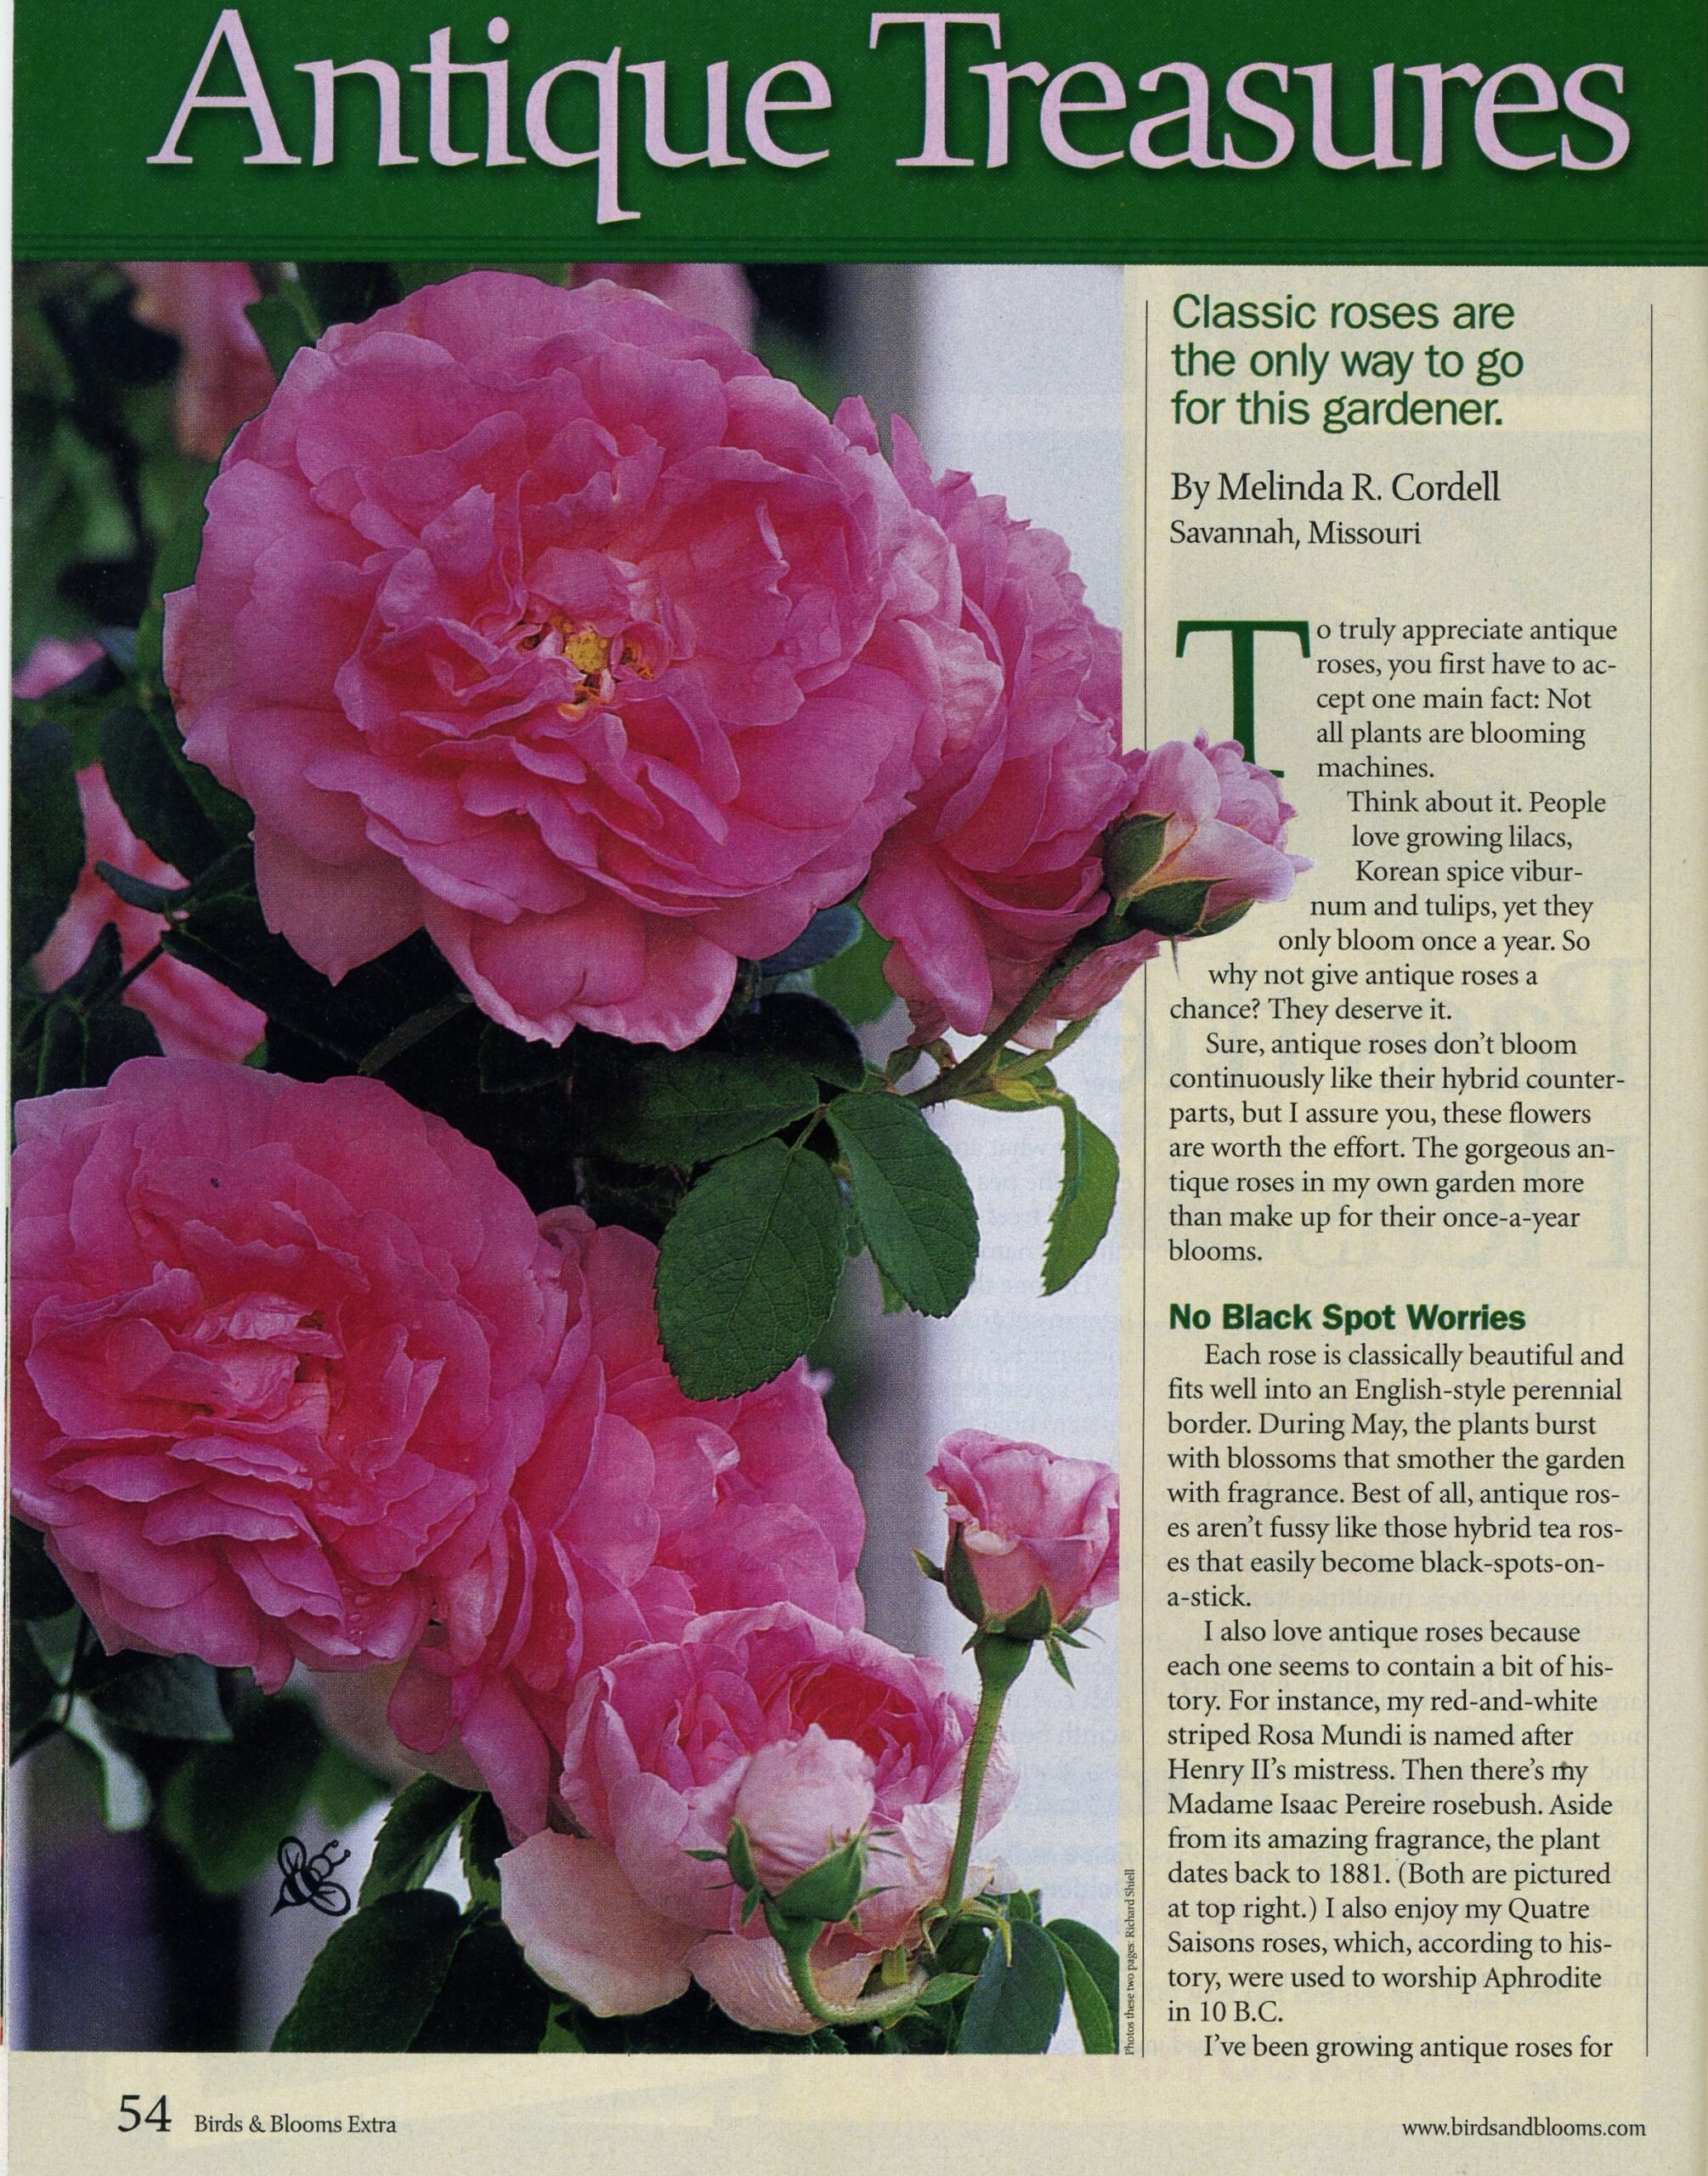 Antique Roses for Birds and Blooms